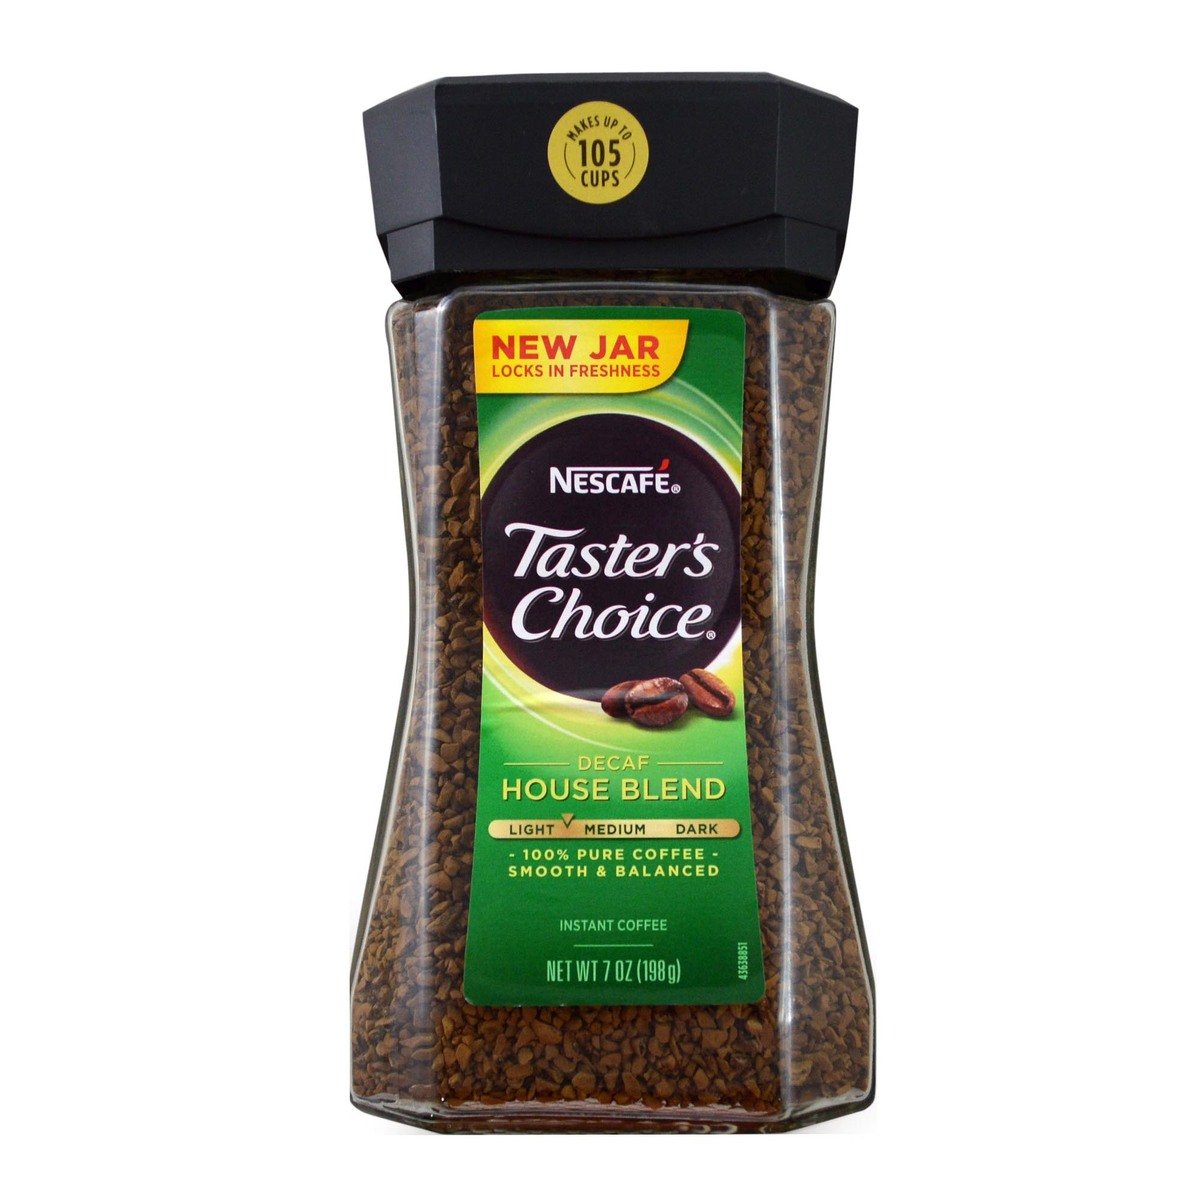 Nescafe Tester's Choice Decaf House Blend 198 g